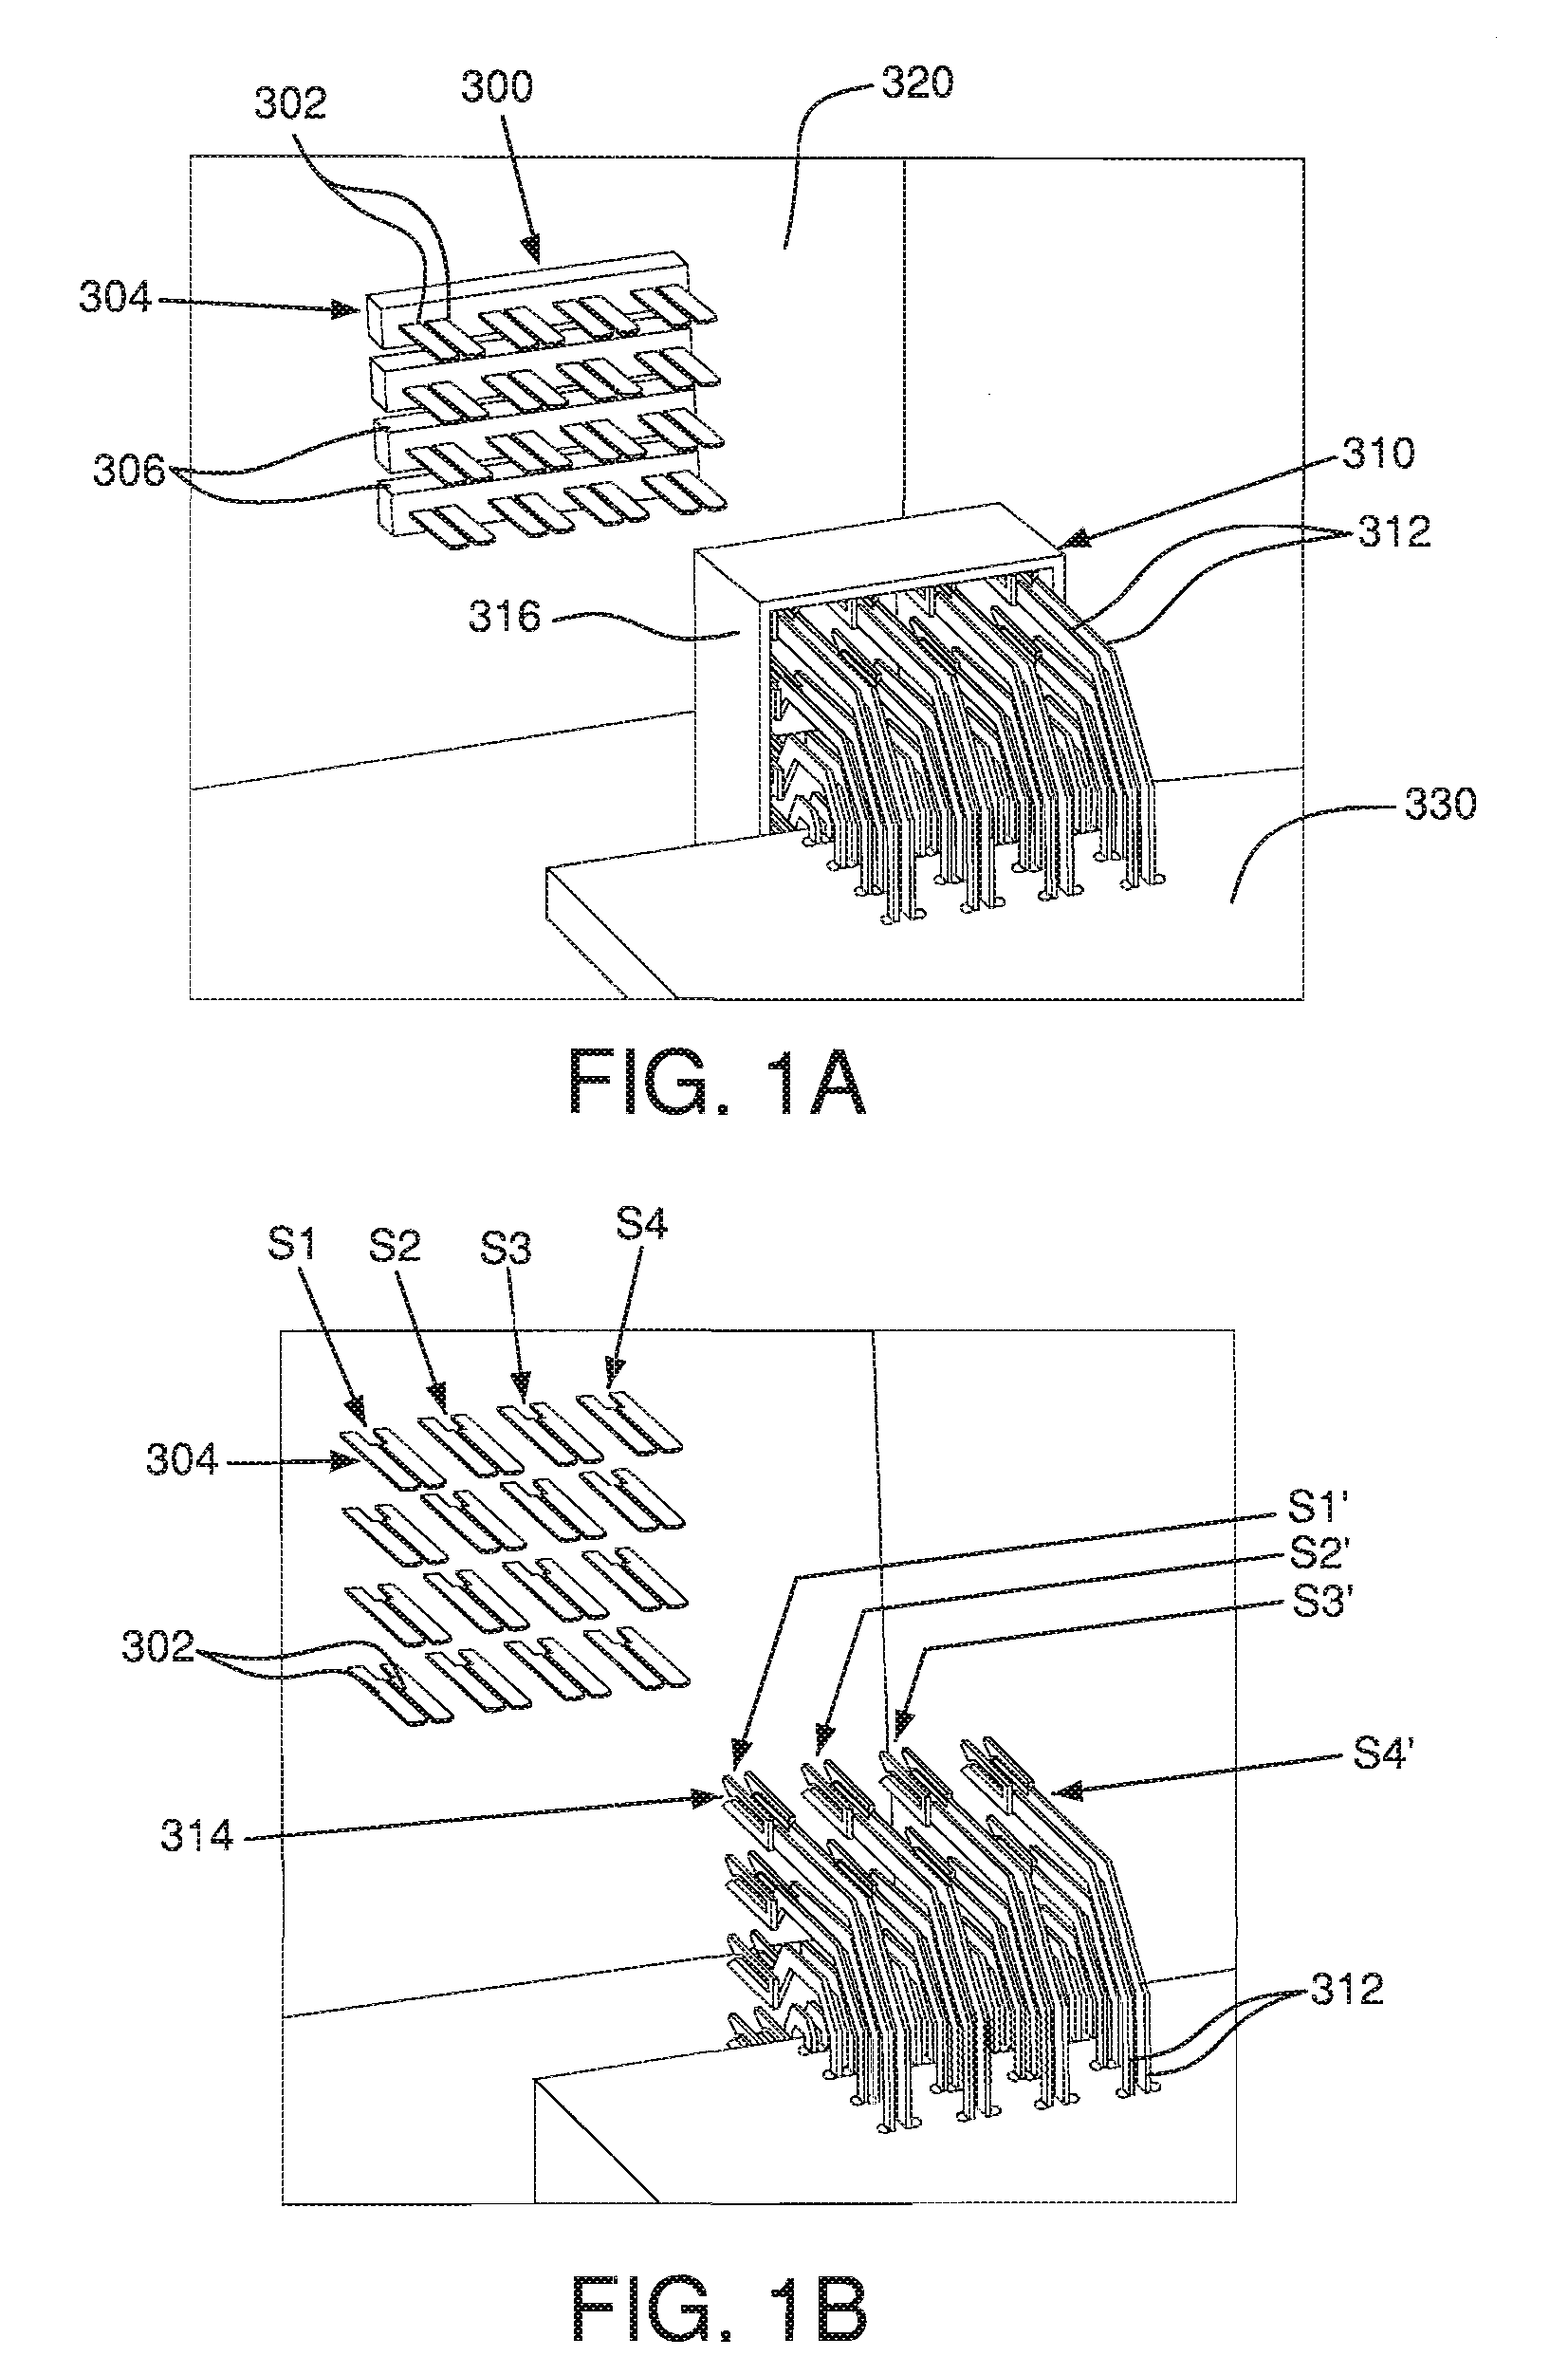 Broadside-to-edge-coupling connector system